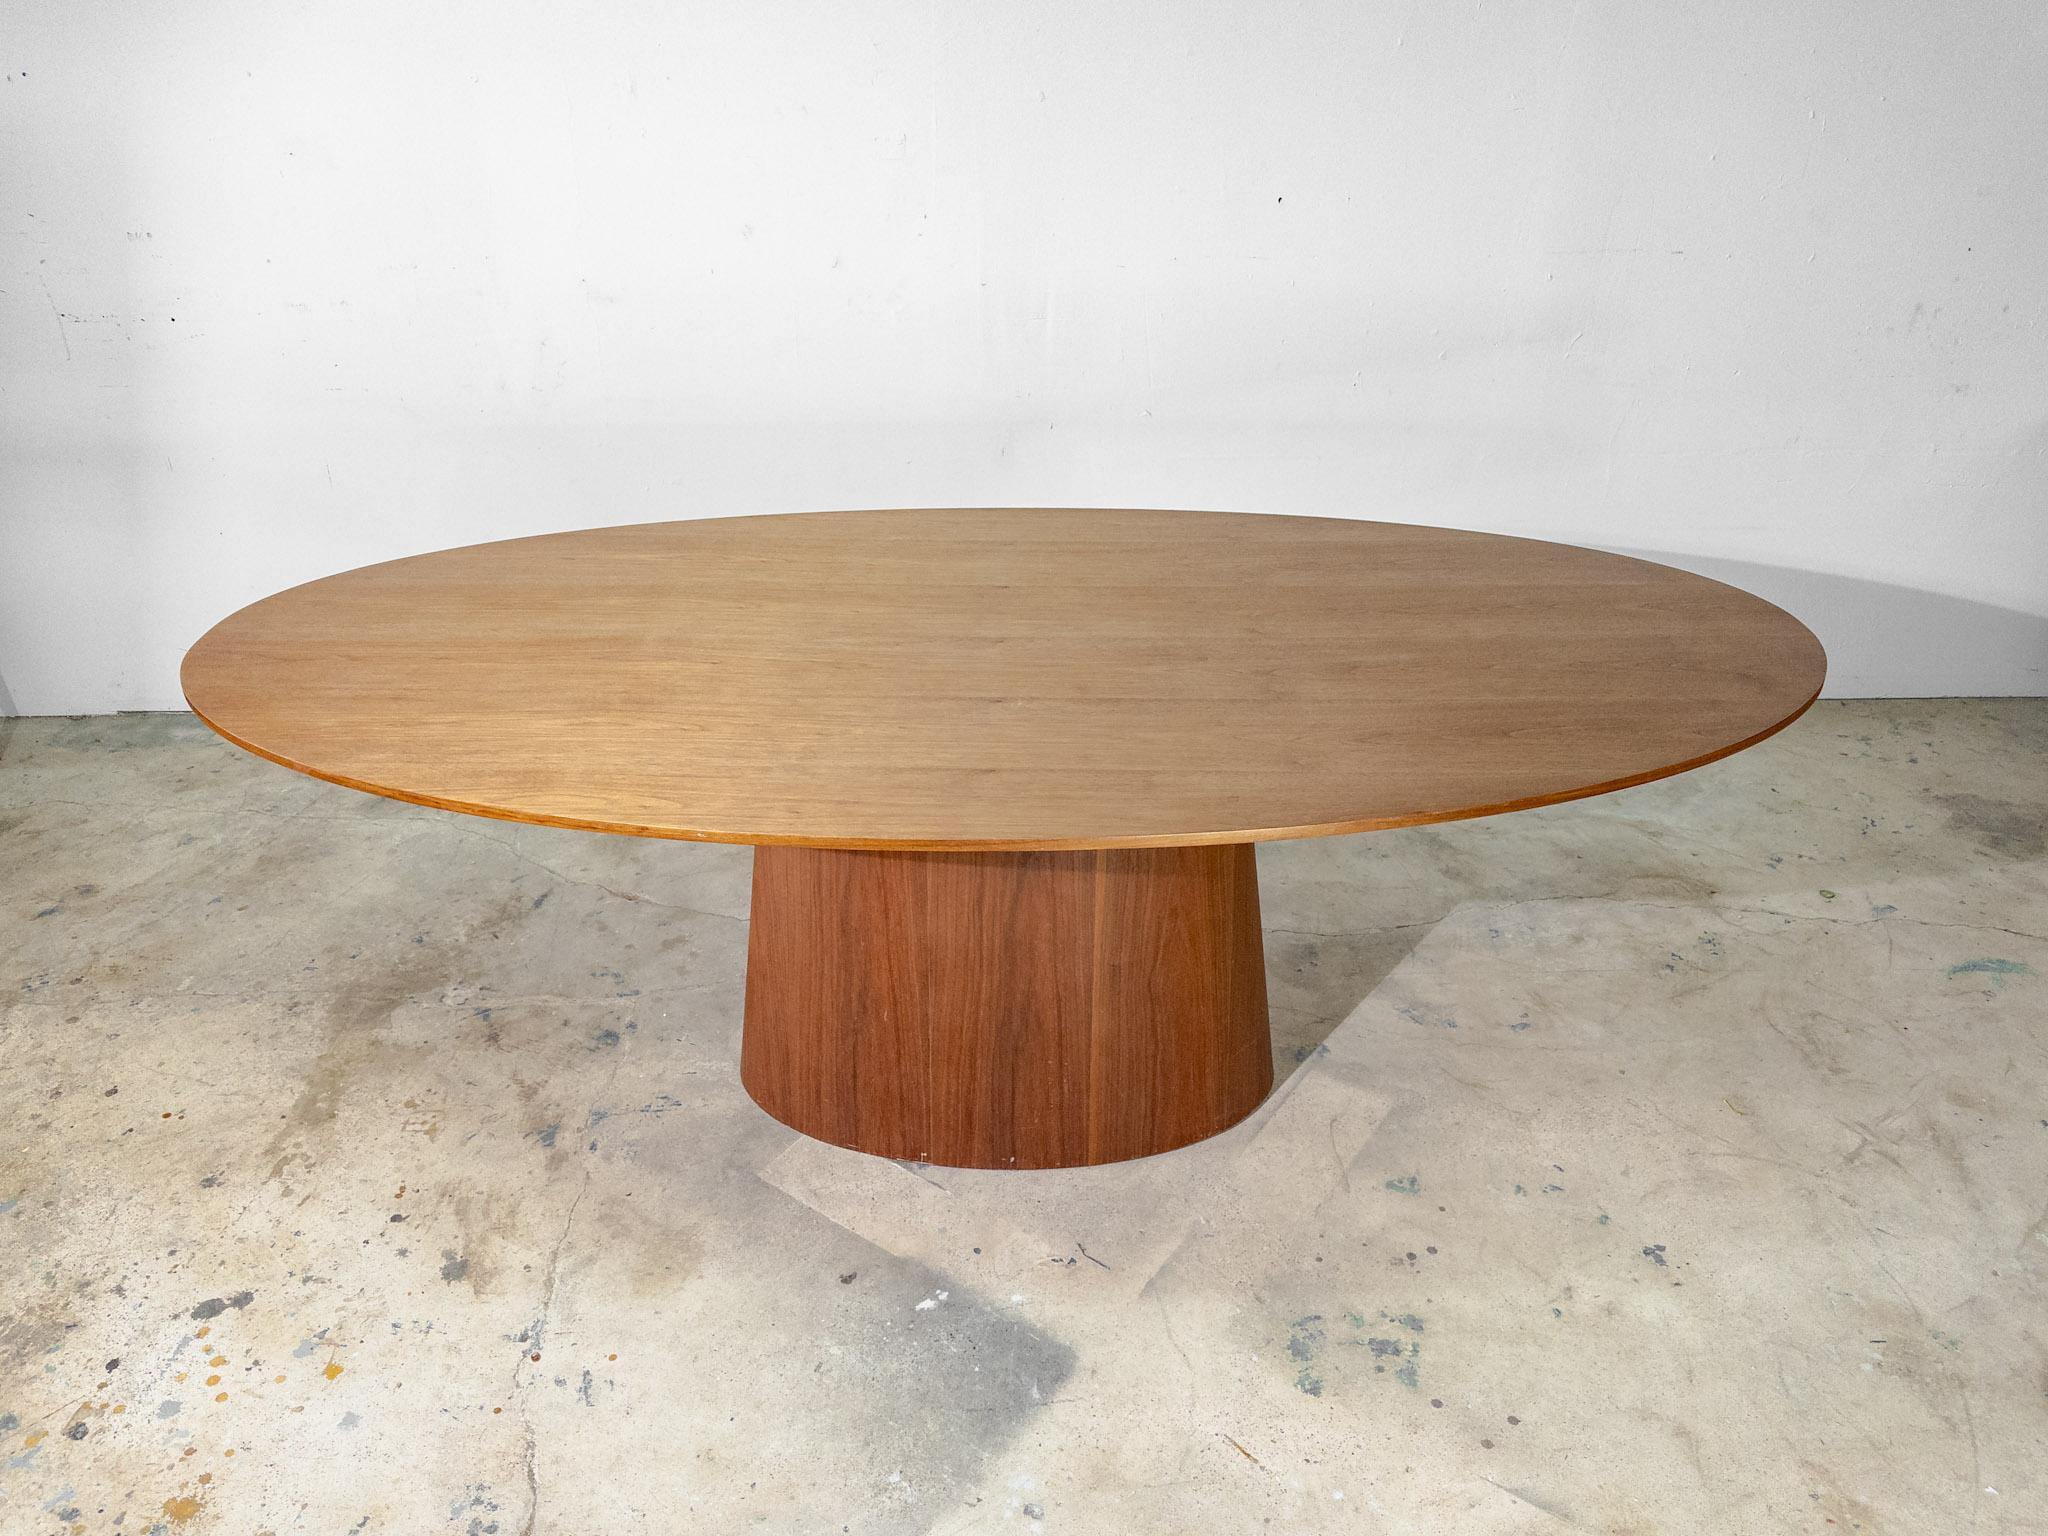 Crafted with exquisite precision, the Angel Cerda 1013 oval dining table from the Nature Life collection epitomizes sophistication. Its sleek silhouette is adorned with a lustrous walnut veneer, emanating warmth and elegance. The oval shape offers a